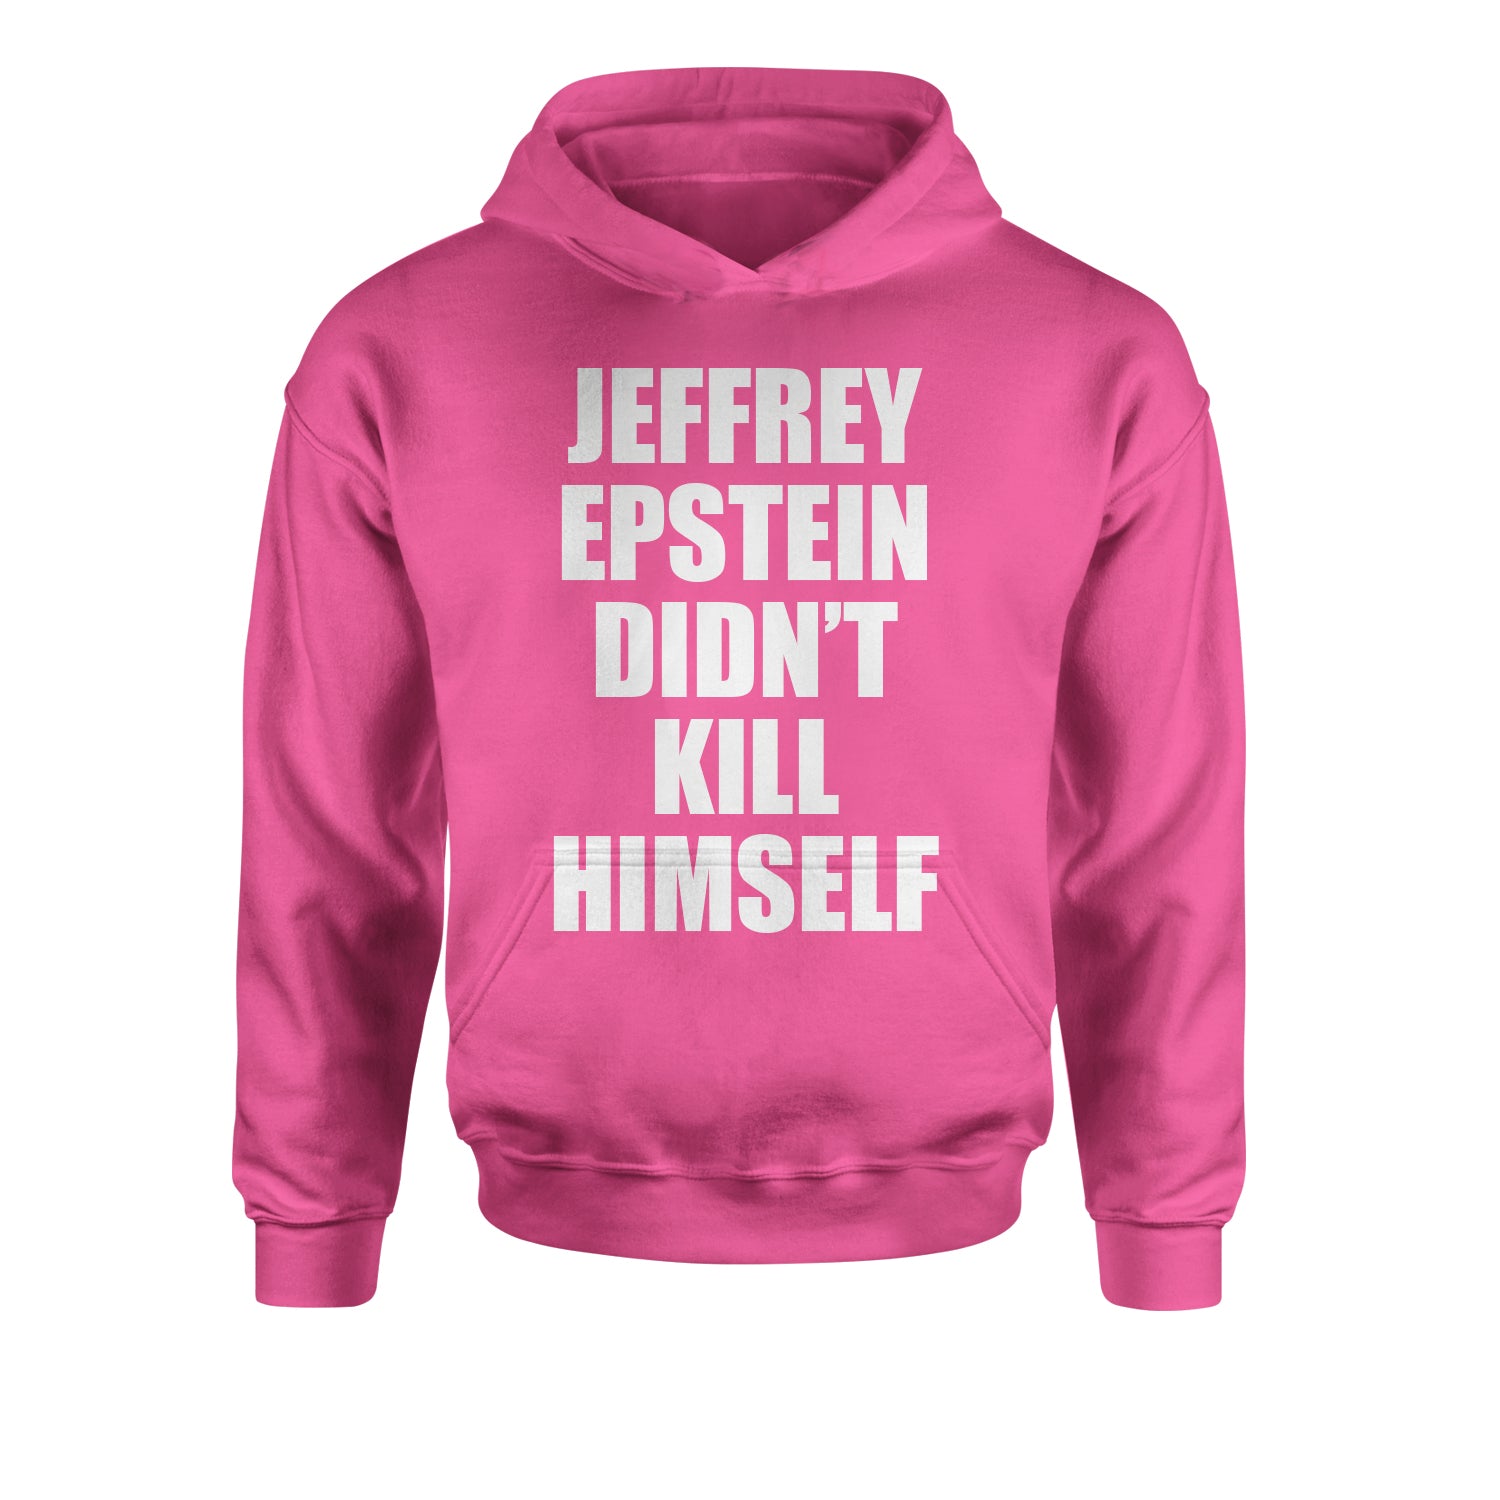 Jeffrey Epstein Didn't Kill Himself Youth-Sized Hoodie coverup, homicide, murder, ssadgk, trump by Expression Tees